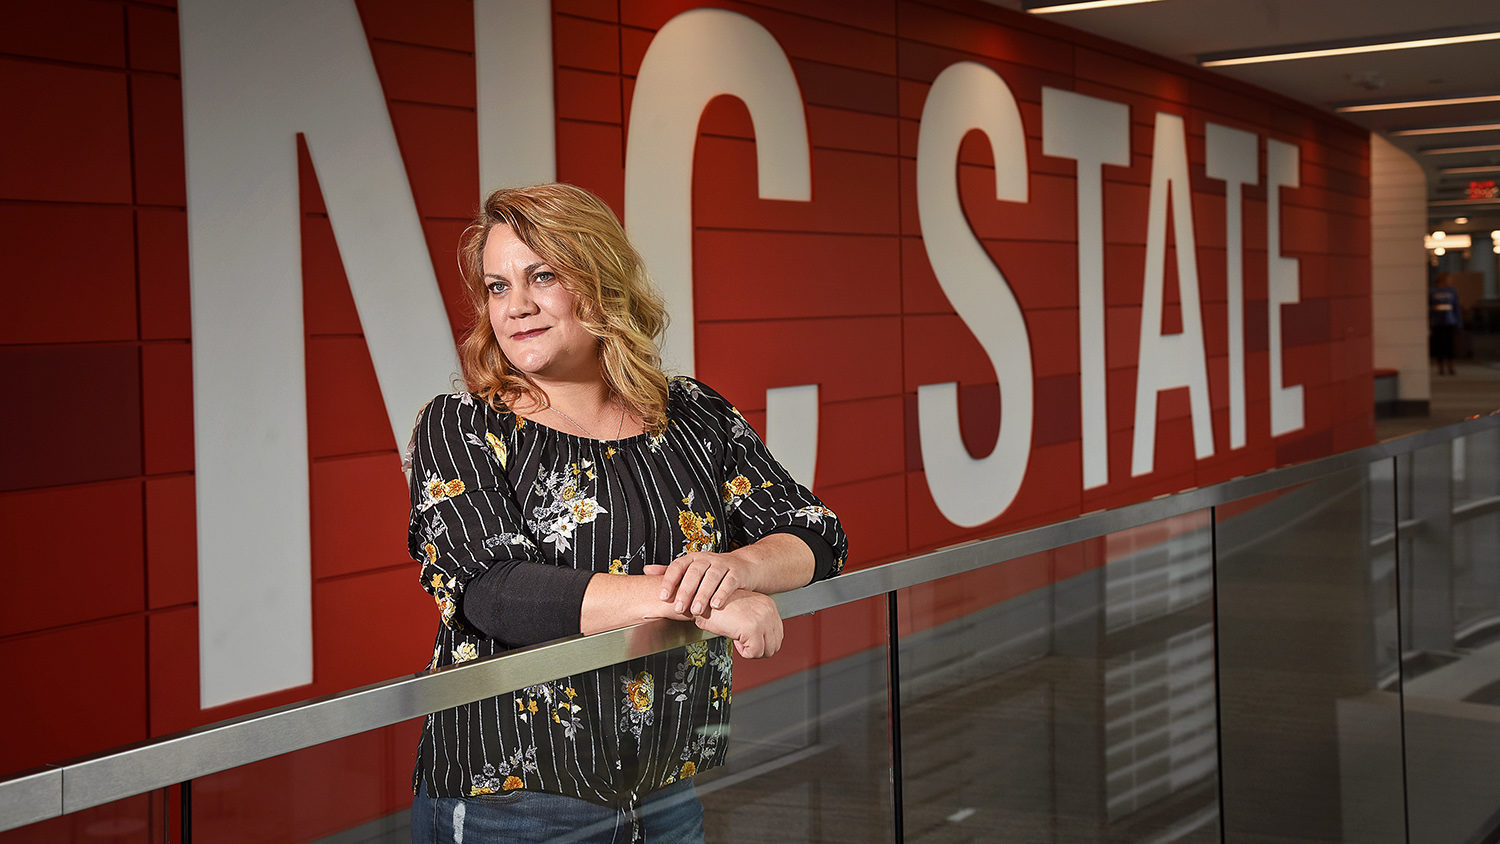 Student Alison Plumley stands in front of the words "NC State" at Talley Student Union.